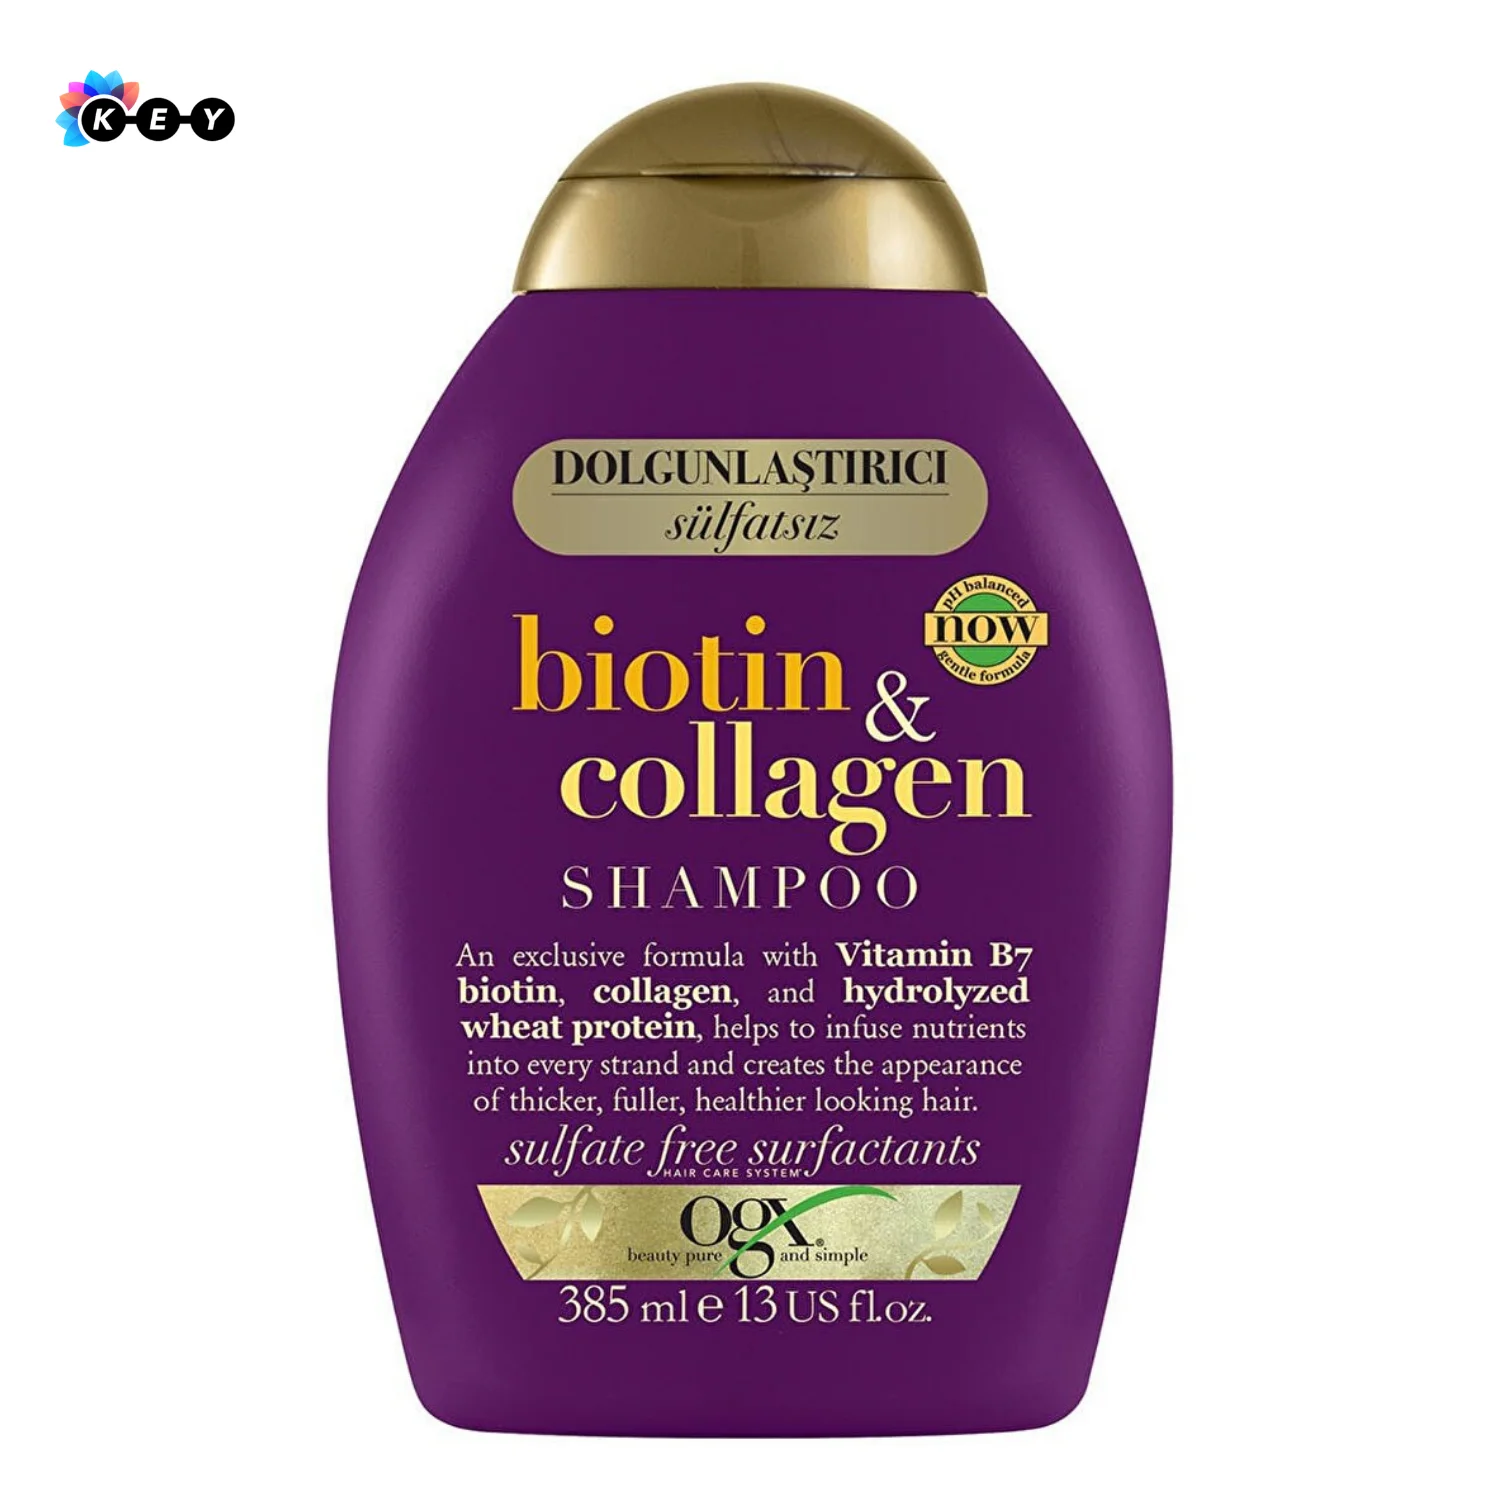 

OGX Plumper Biotin & Collagen Sulfate Free Shampoo 385 ml, The perfect volumizer for fuller, healthier-looking and shiny hair.